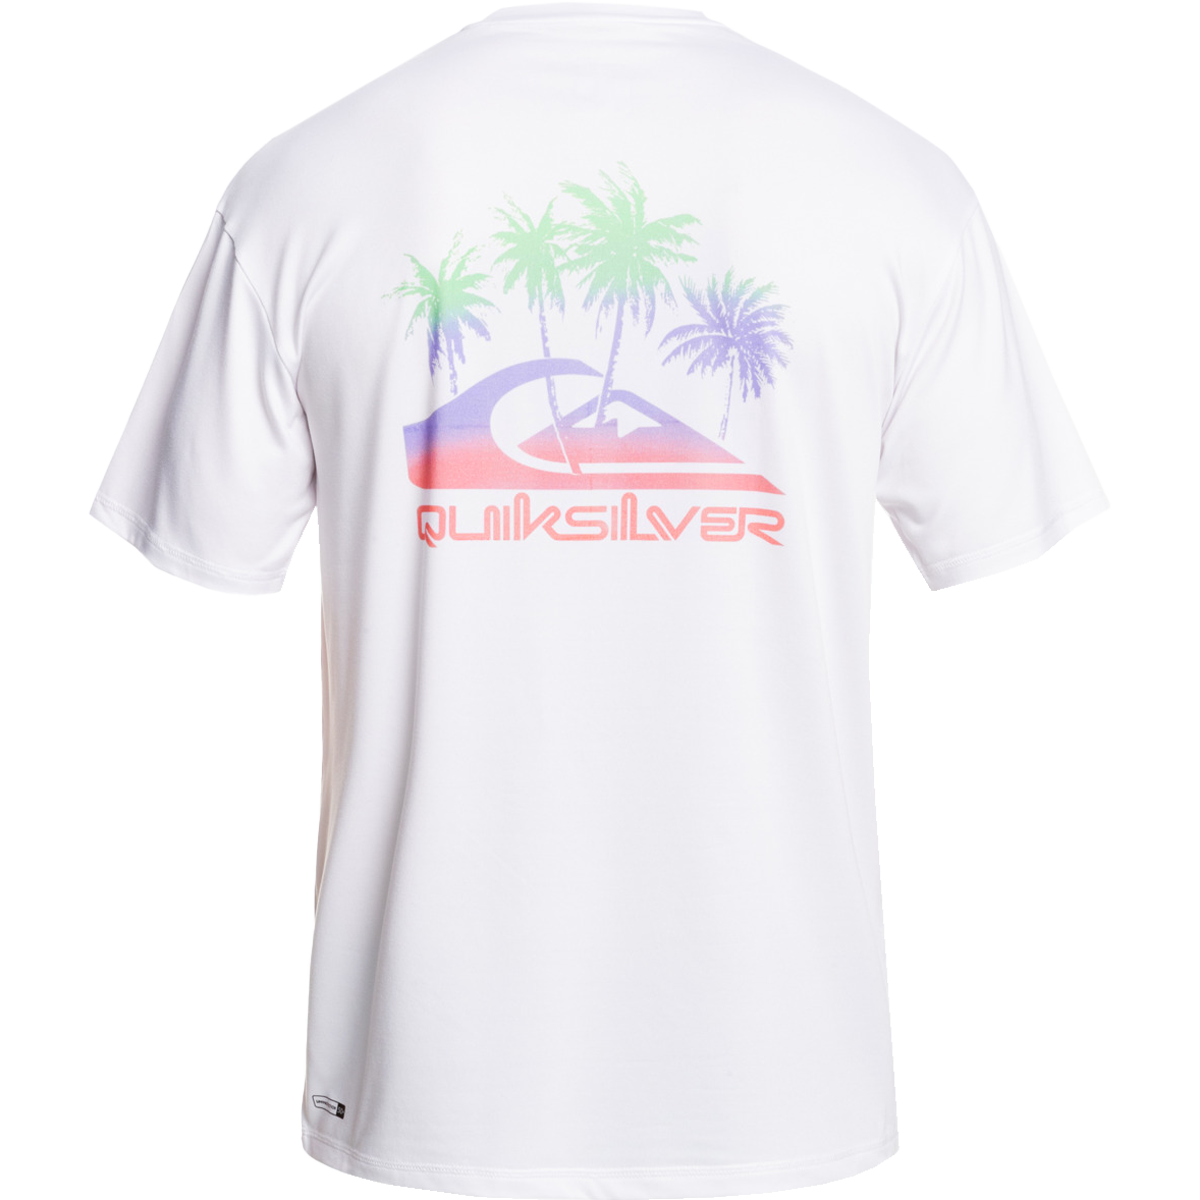 Men's Mixed Session Short Sleeve alternate view